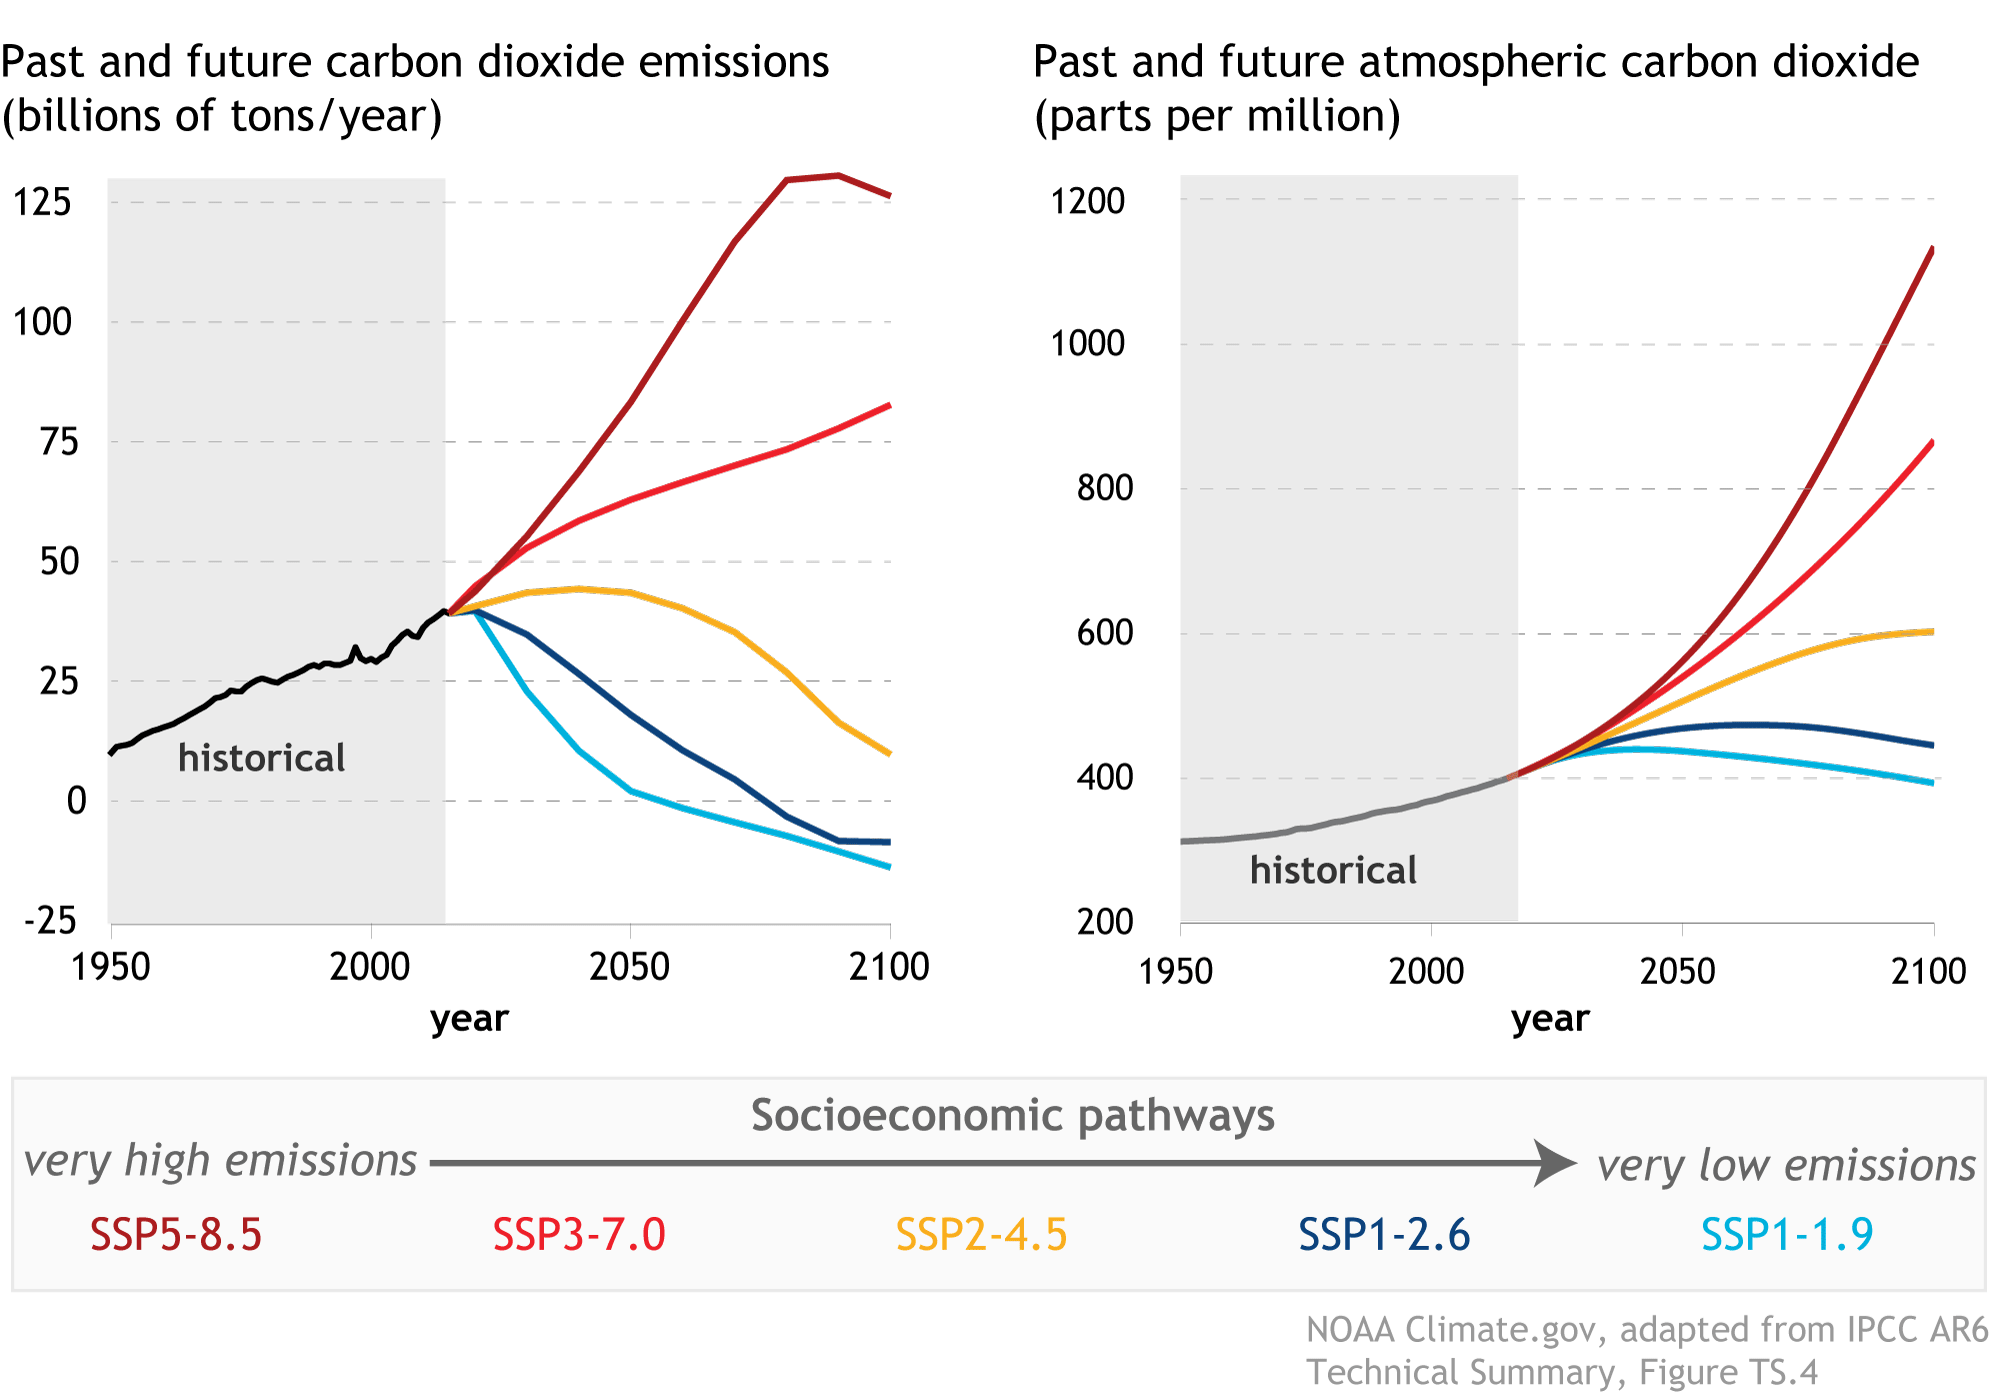 Two graphs with colored lines showing (left) past and different future annual carbon dioxide emissions with diffrent socioeconomic pathways and (right) past and future atmospheric carbon dioxide amounts for those pathways